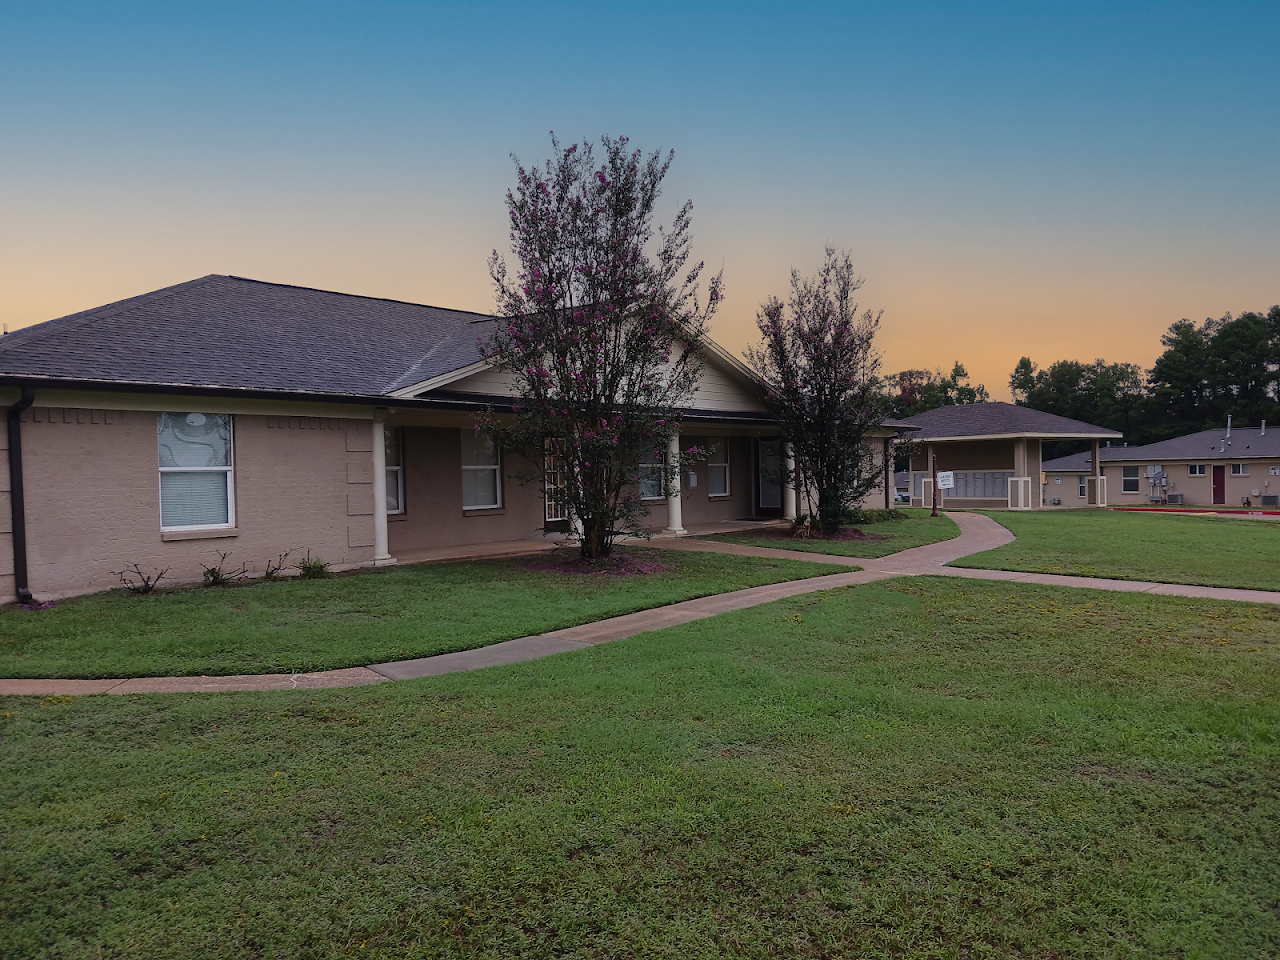 Photo of UNION ACRES. Affordable housing located at 818 COTTON FORD ROAD CENTER, TX 75935